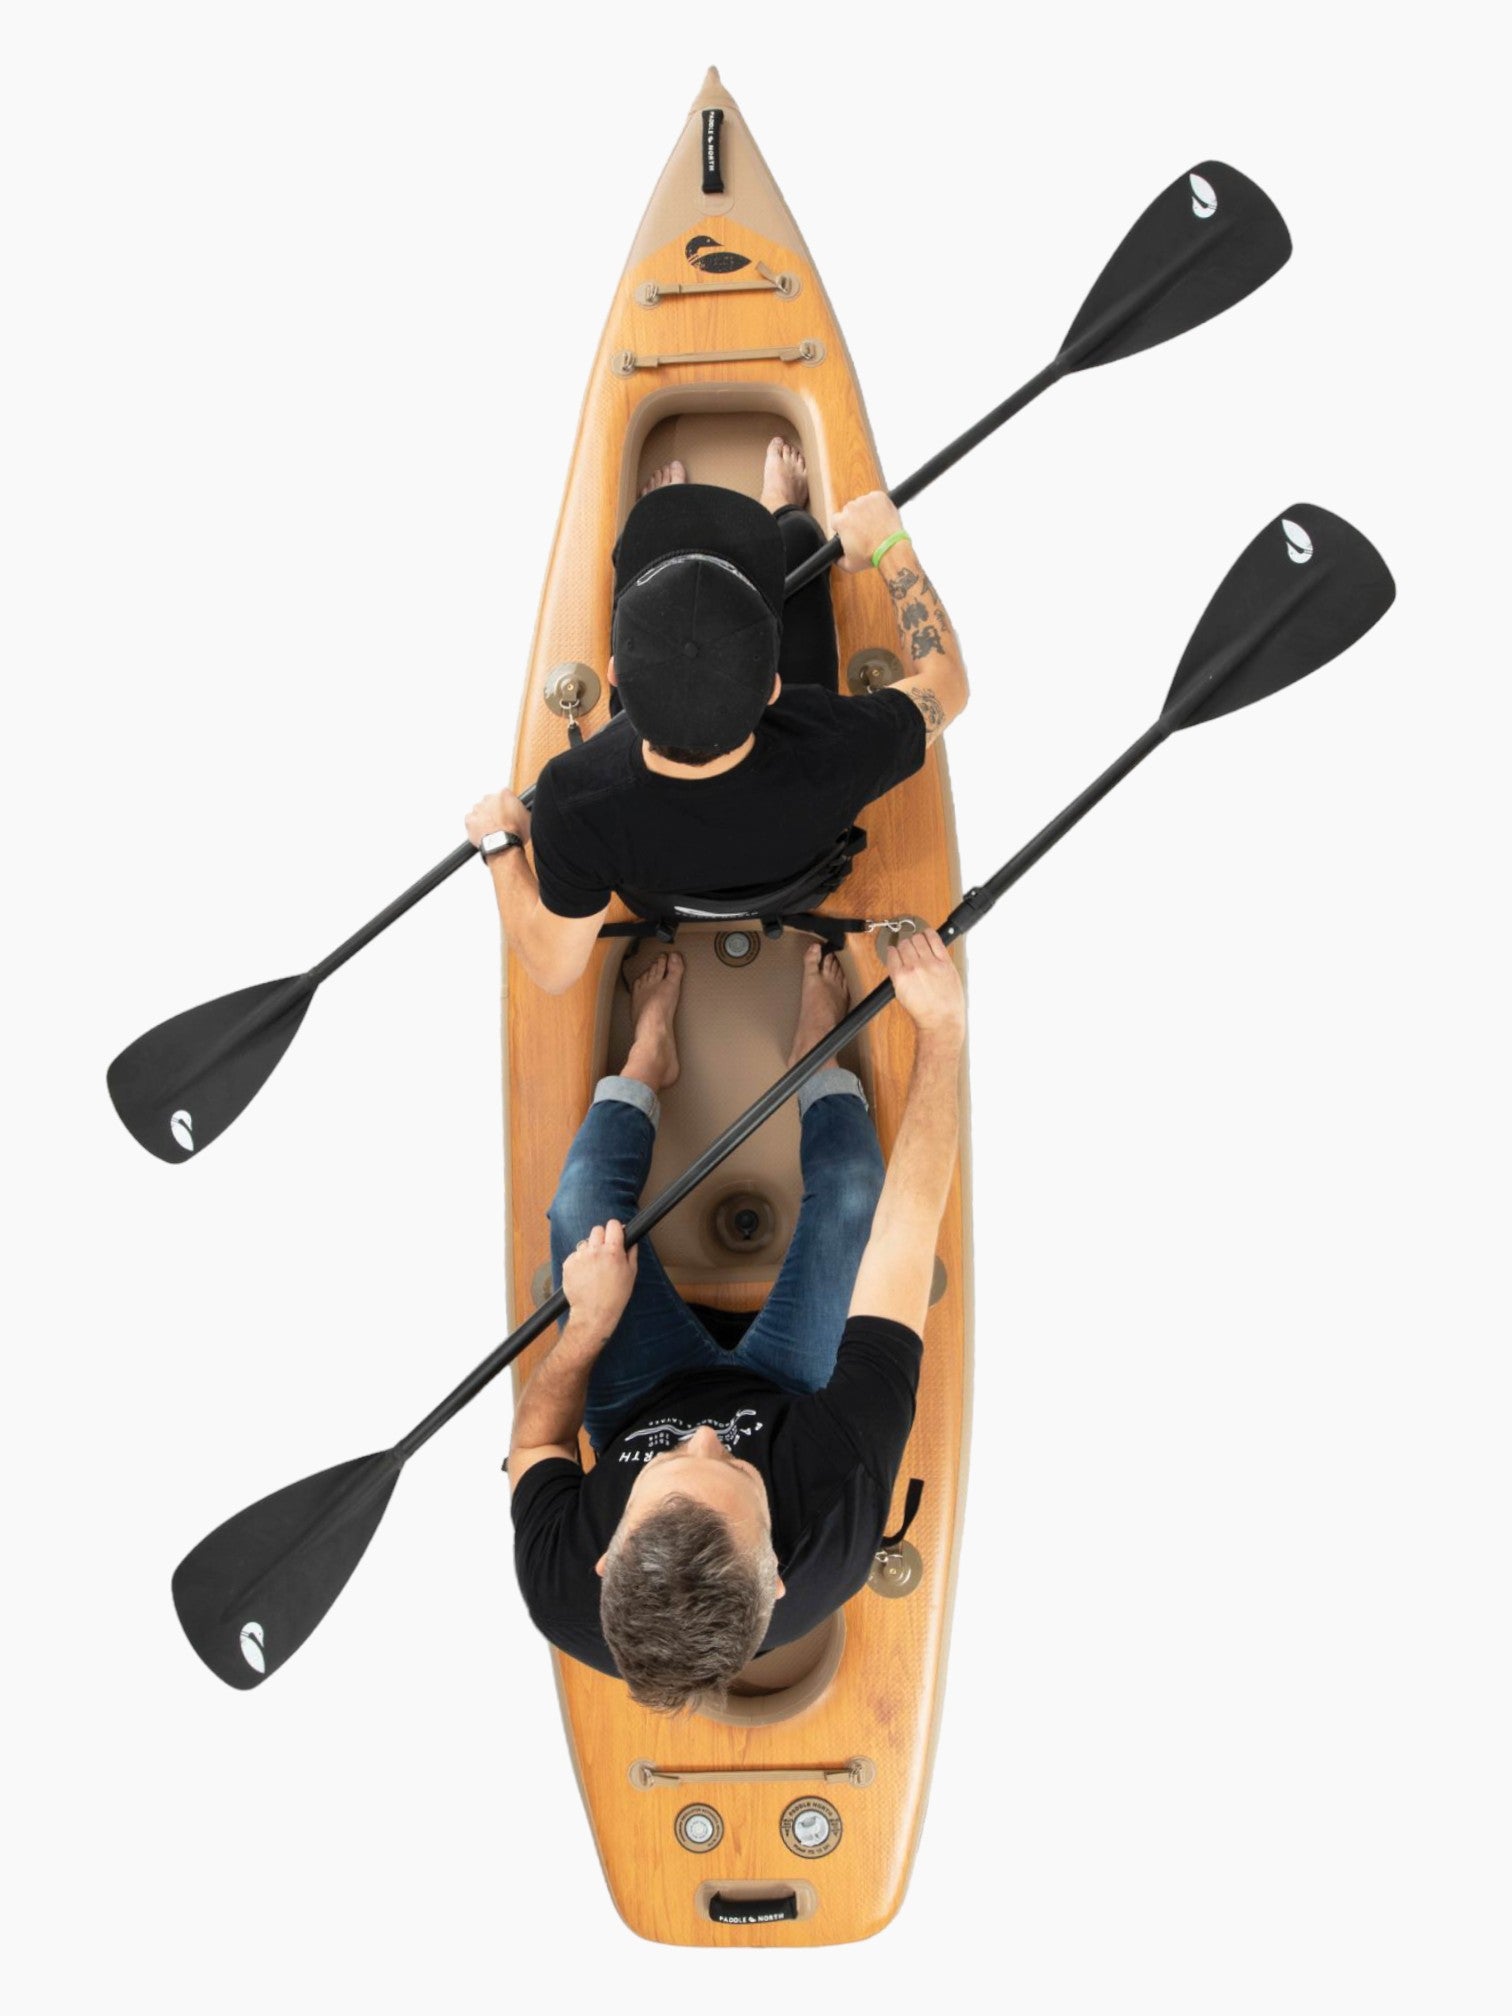 Two people sitting in the double inflatable kayak with black paddles.